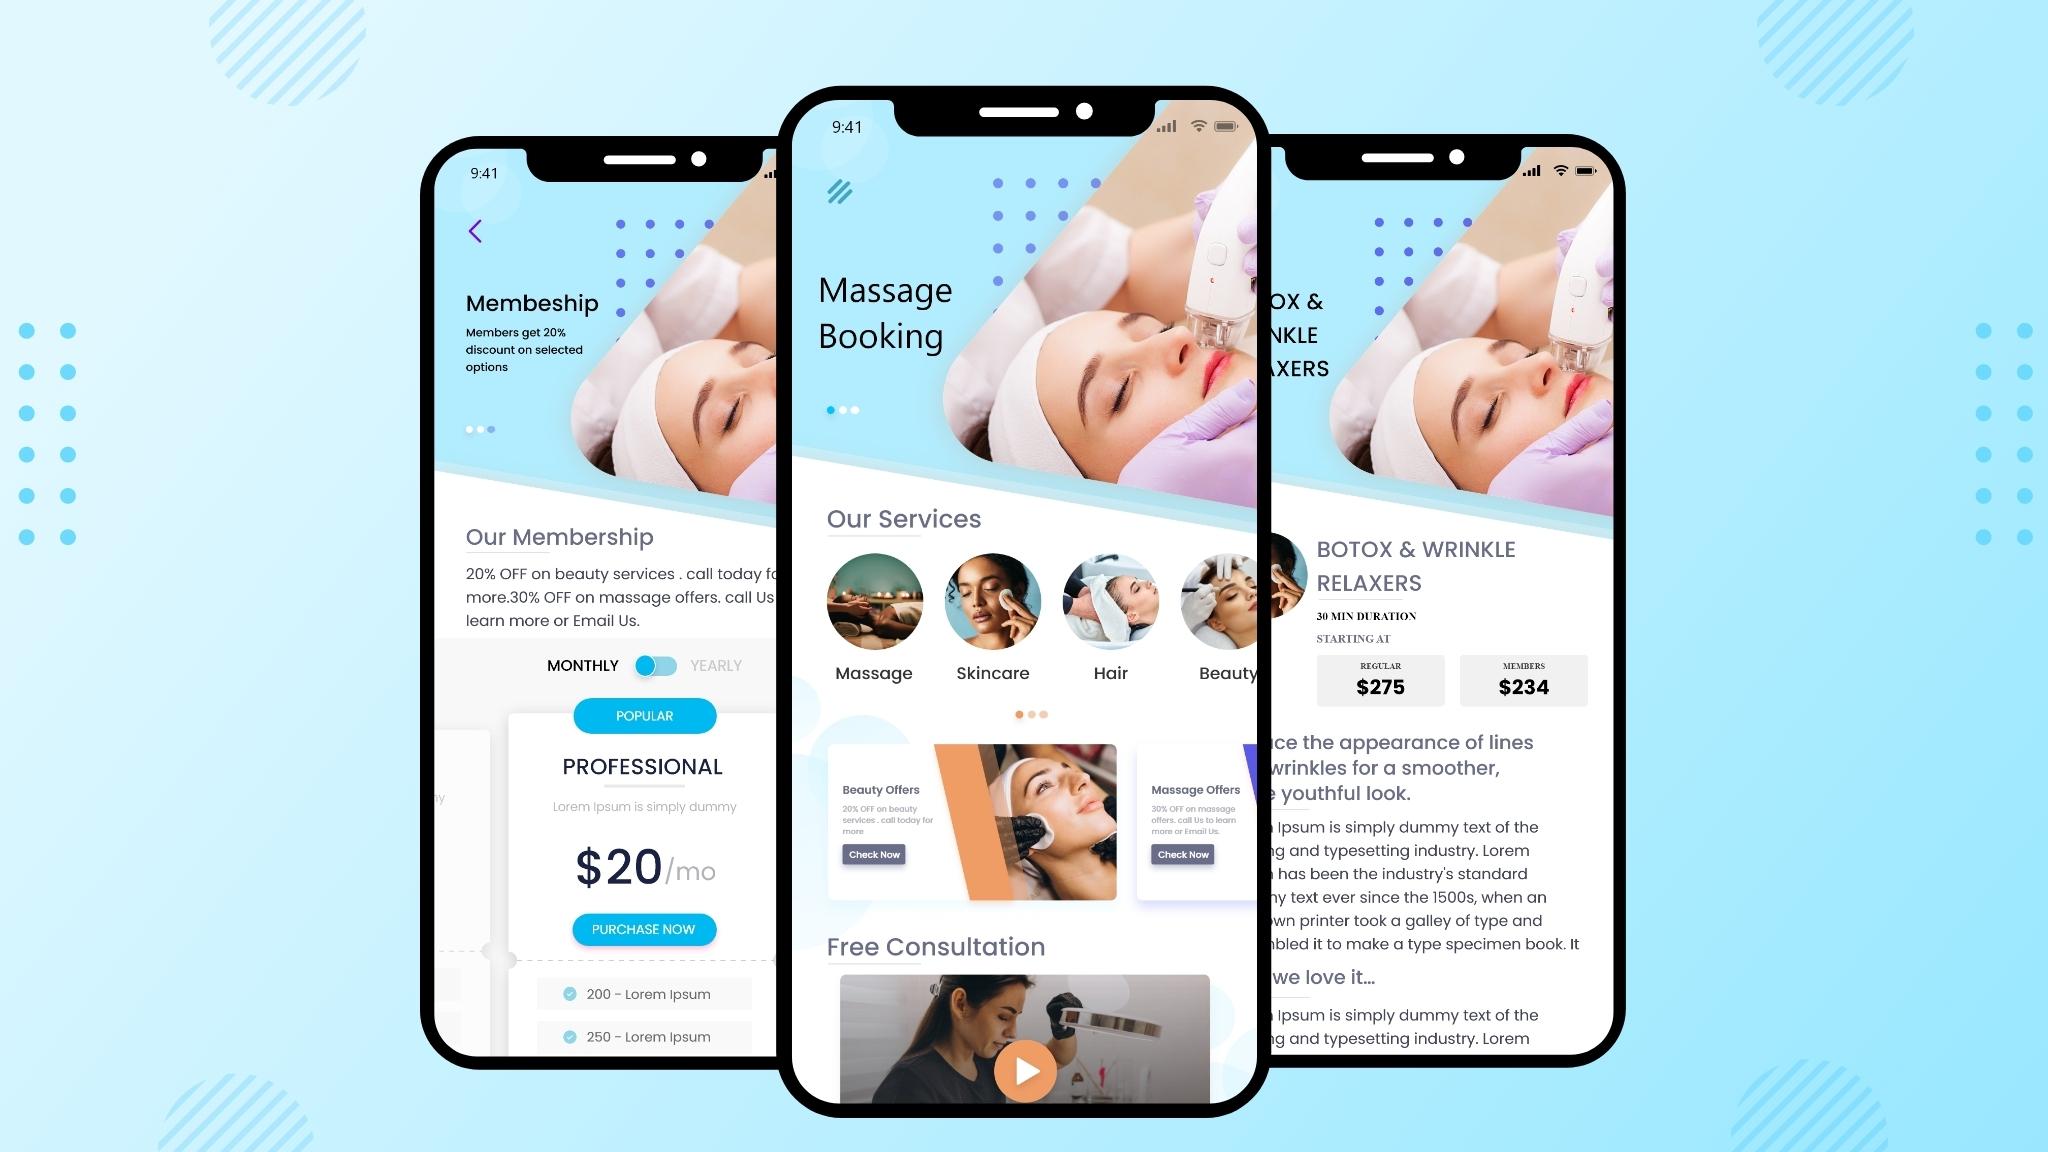 What Does It Take To Develop An On Demand Massage App Like Soothe?